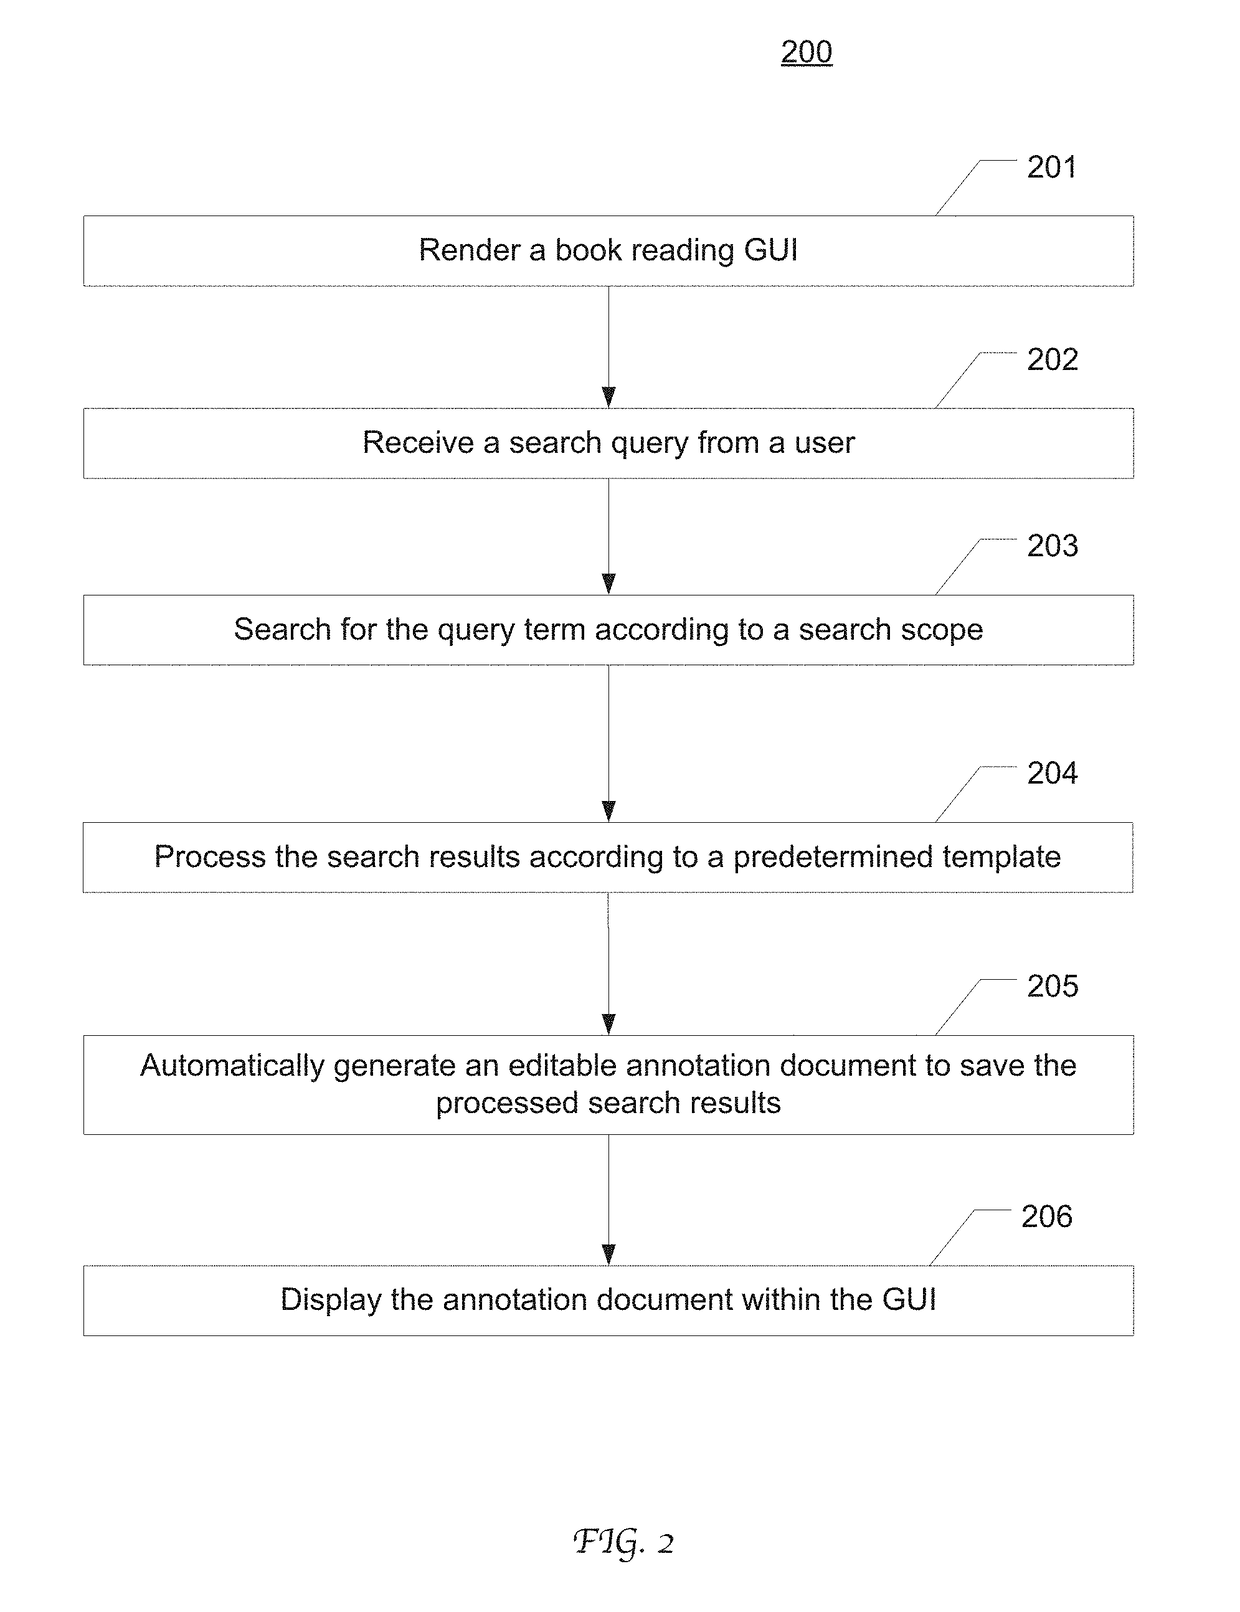 Automatically generating customized annotation document from query search results and user interface thereof